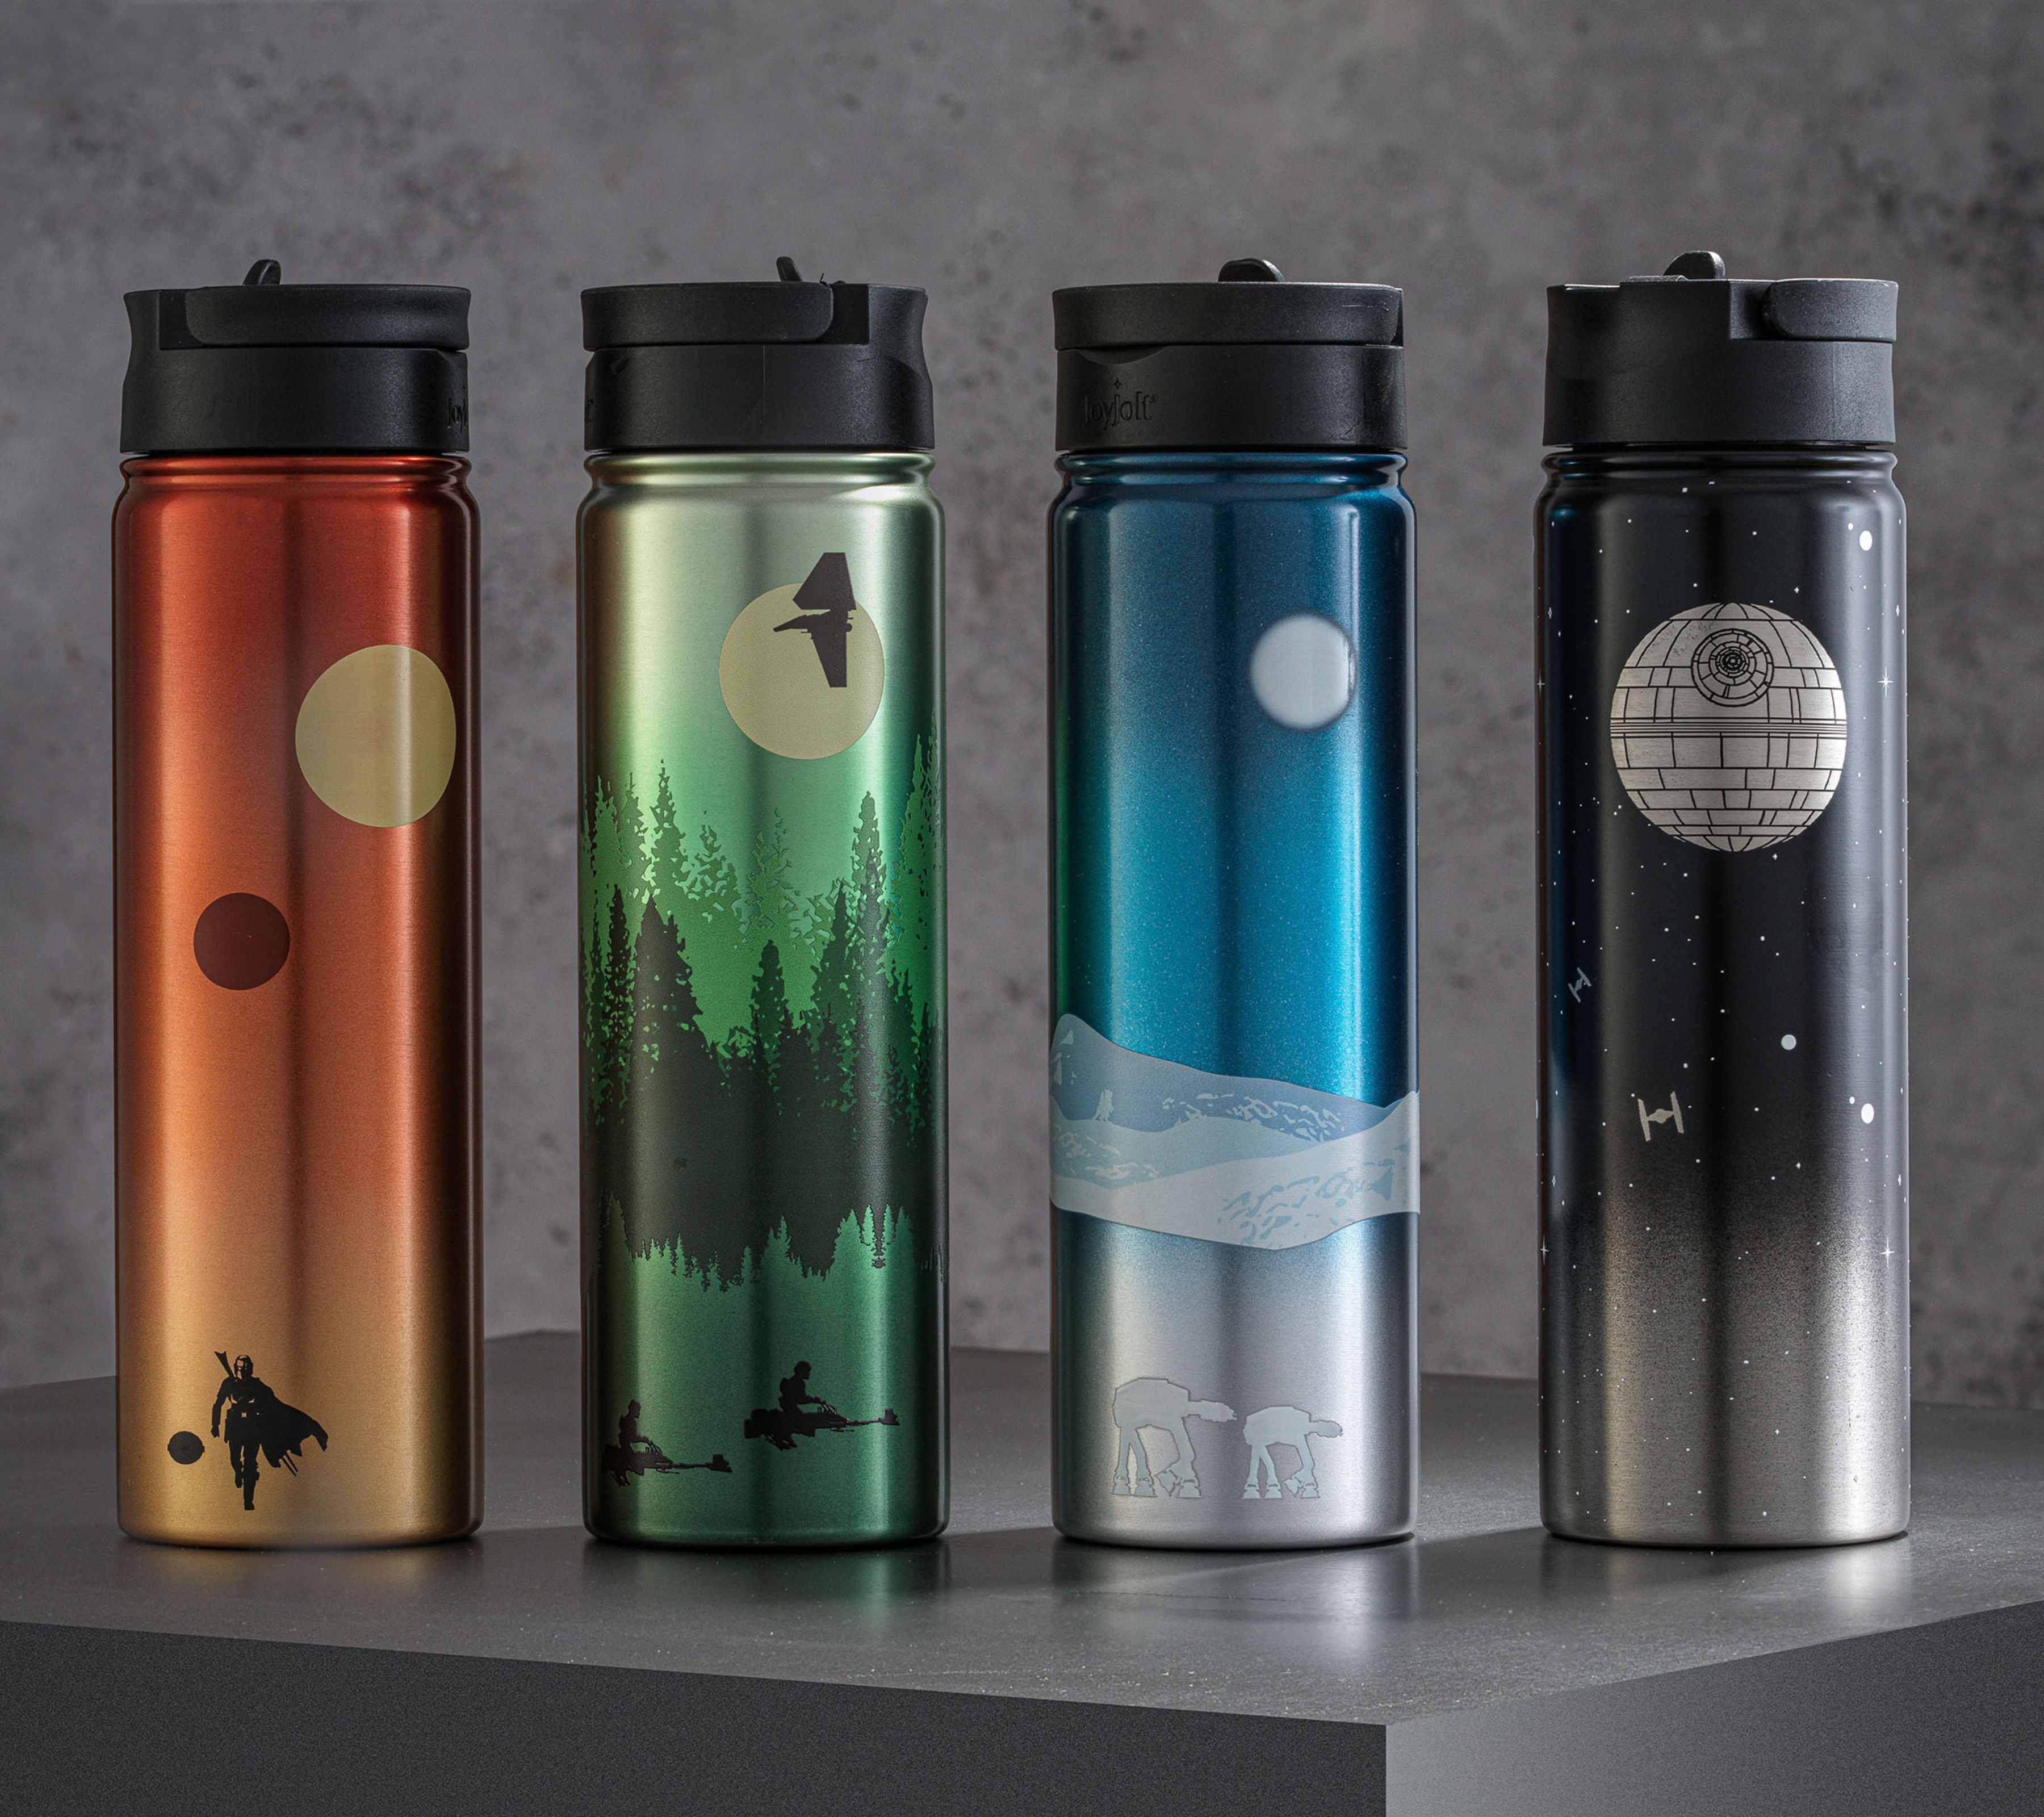 Star Wars™ Destinations Collection Death Star™ Vacuum Insulated Water Bottle